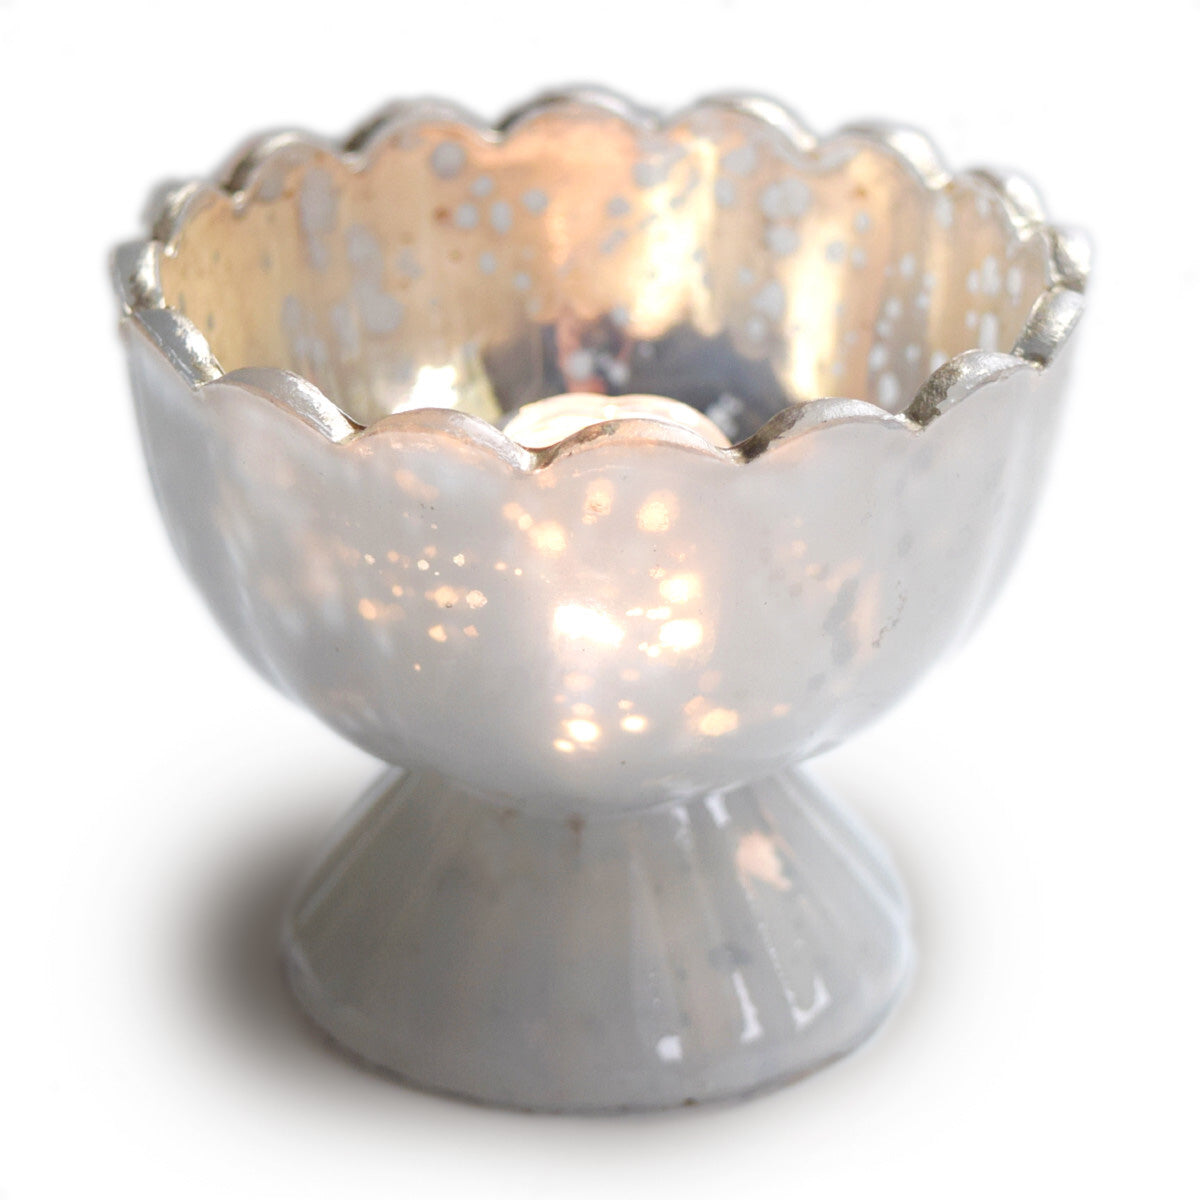 6 Pack | Vintage Mercury Glass Chalice Candle Holders (3-Inch, Suzanne Design, Sundae Cup Motif, Pearl White) - For Use with Tea Lights - For Home Decor, Parties and Wedding Decorations